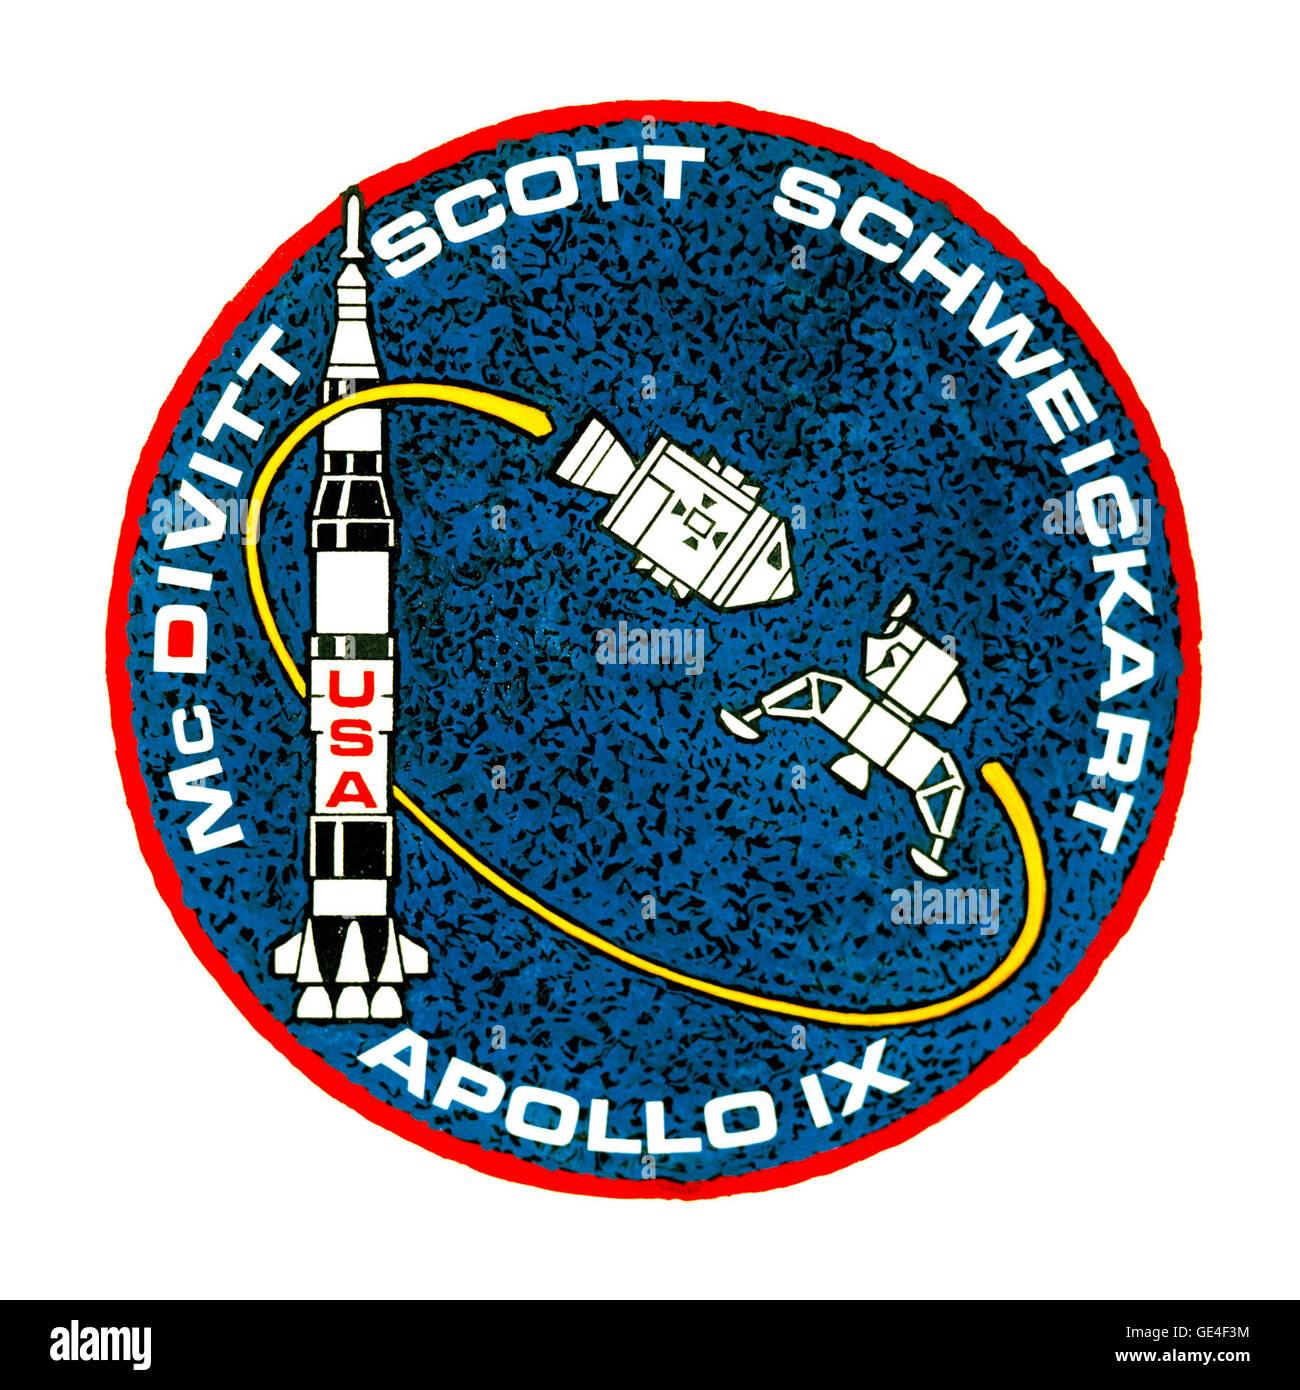 Launch- March 3, 1969 Landing- March 13, 1969 Astronauts- James A. McDivitt, Russell L. Schweickart and David R. Scott Apollo 9 preformed the first two successful rendezvous and docking with the Command and Service Module (CSM) and Lunar Module (LM). Overall the mission was a success with all the prime mission objectives being met.  www.nasa.gov/mission pages/apollo/missions/apollo9.html#.... ( http://www.nasa.gov/mission pages/apollo/missions/apollo9.html#.VAidLRCa-So ) Stock Photo